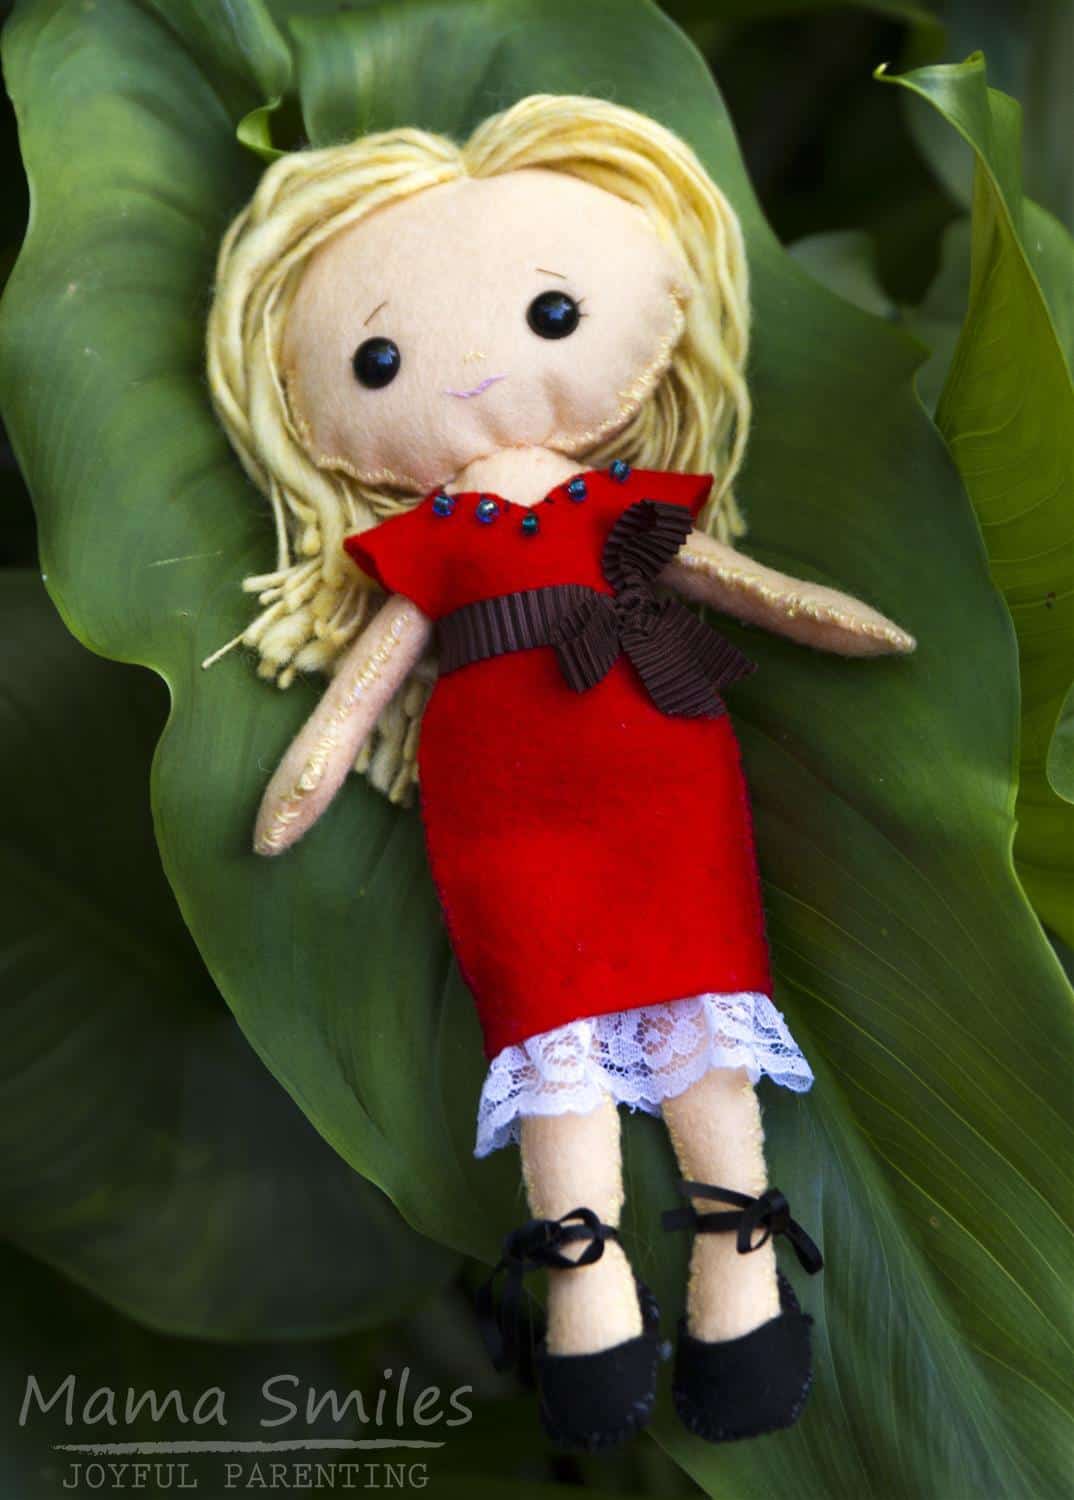 Felt doll sewn by a six-year-old using the pattern and instructions in "My Felt Doll".